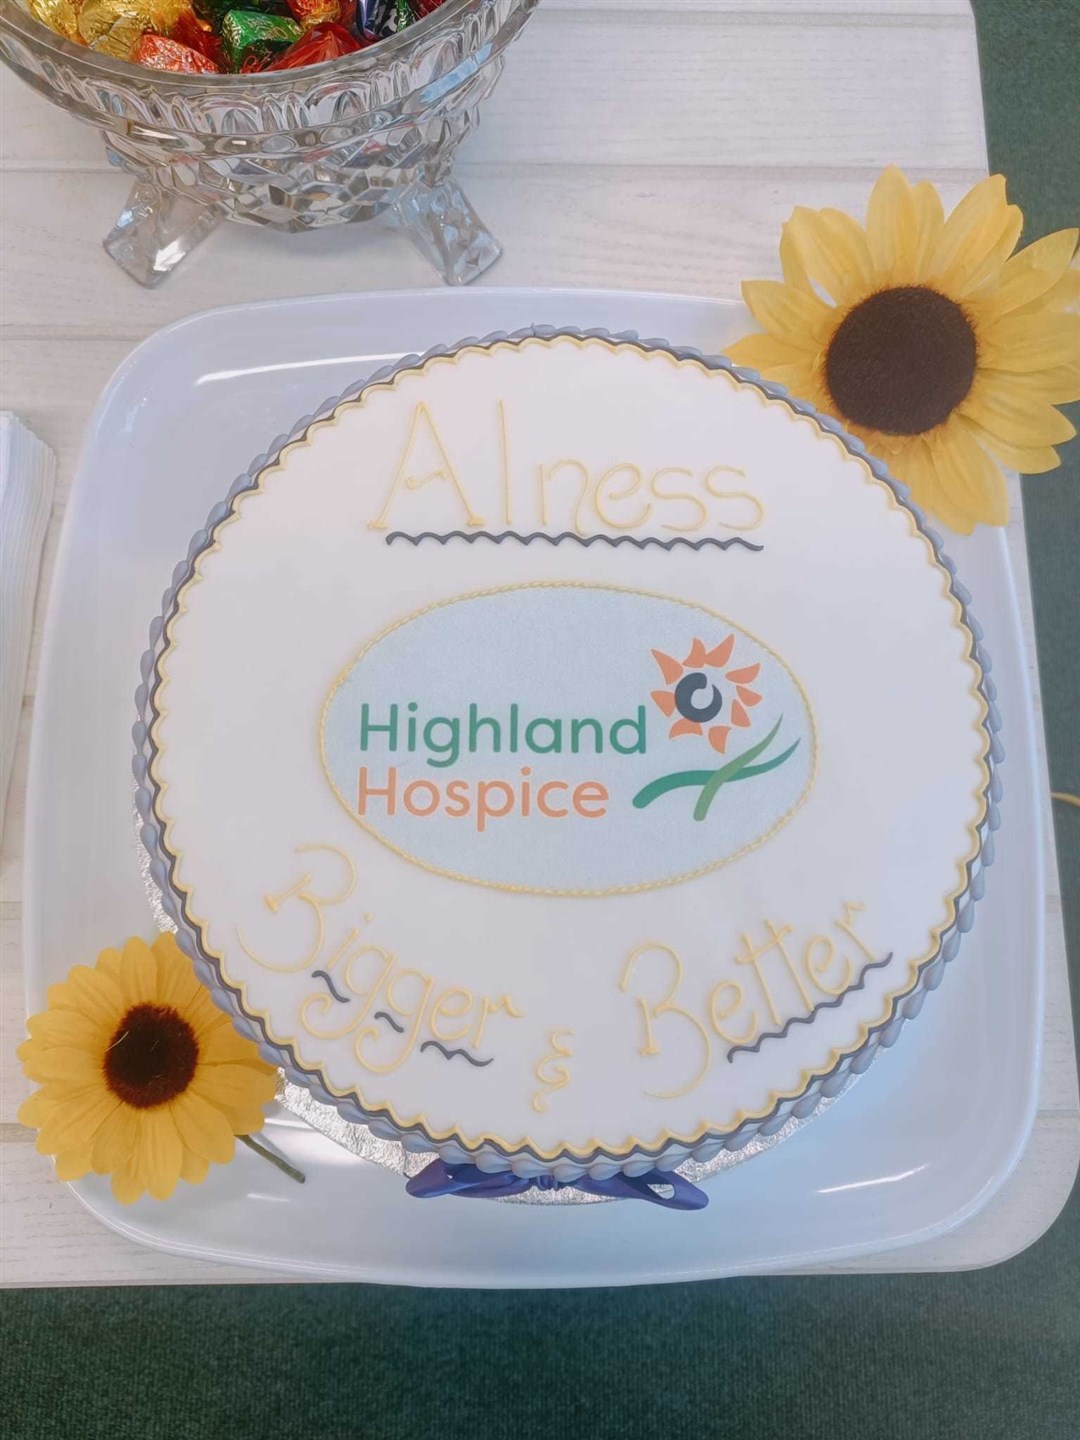 There was celebratory cake with the Highland Hospice name emblazoned proudly across it.